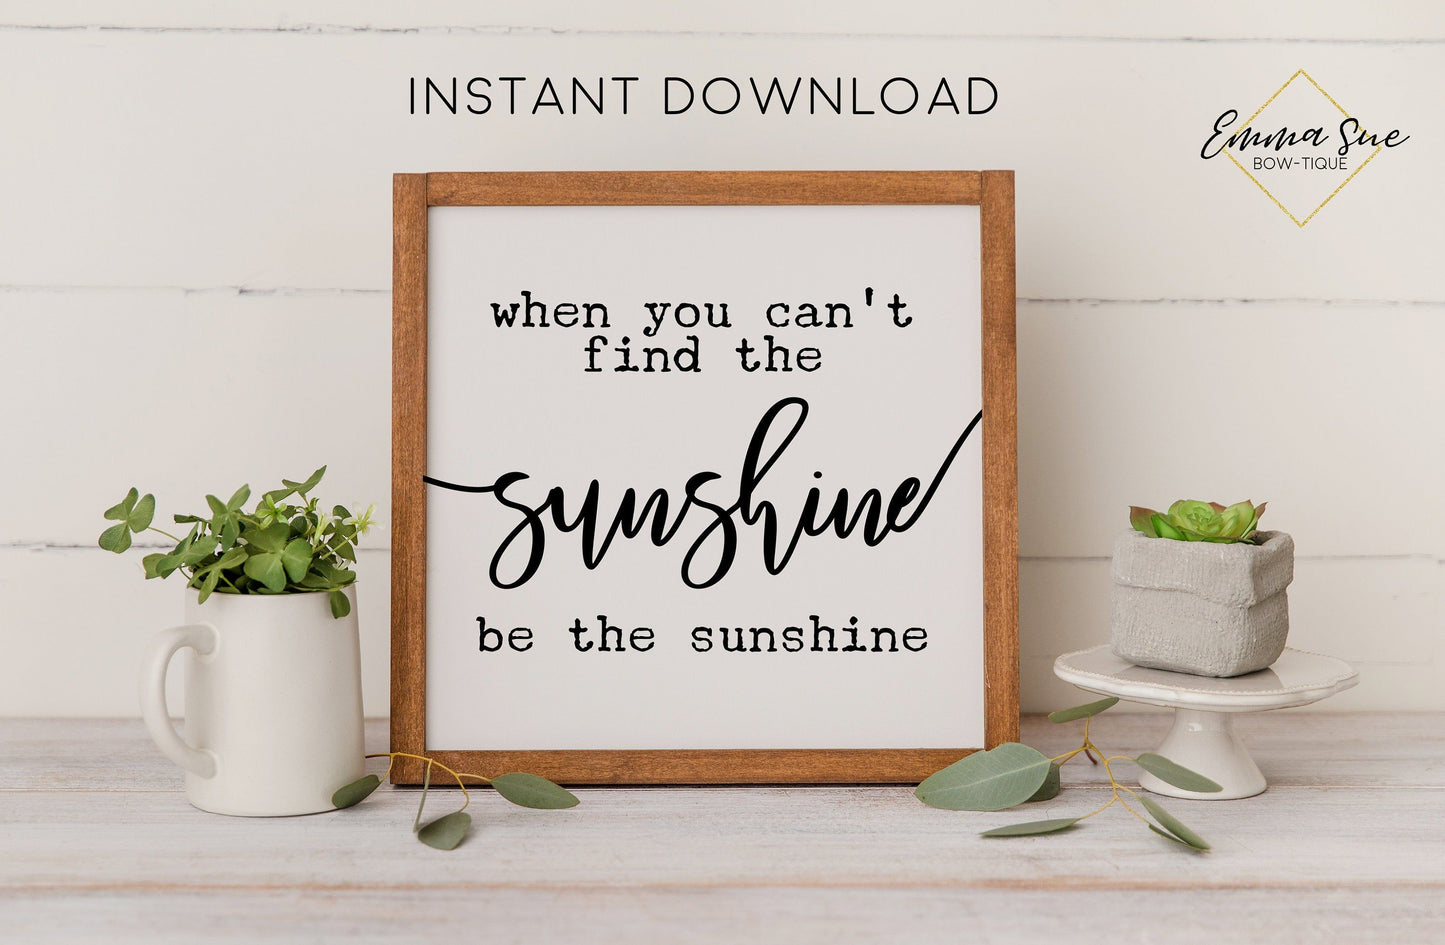 When you can't find the sunshine be the sunshine - Kindness Motivational Quote Printable Sign Wall Art